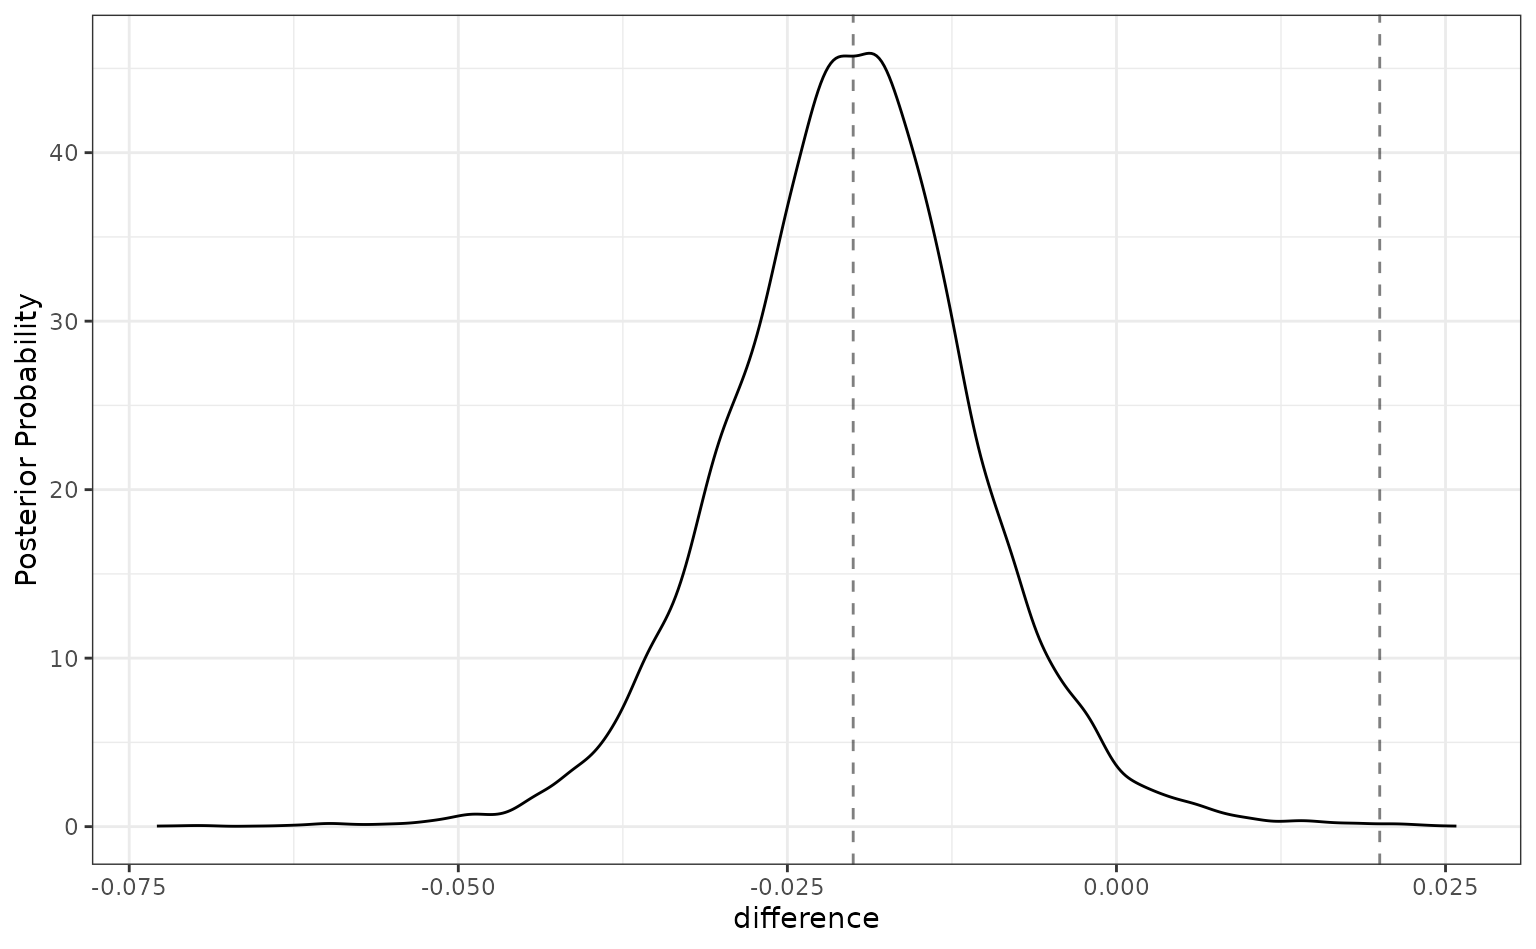 Line chart. Differences in ROC (spatial sign - splines) along the x-axis, posterior along the y-axis. the highpoint of the density is at around -0.02. Full range is -0.05 to 0.02. dotted vertical lines have been placed at -0.02 and 0.02.